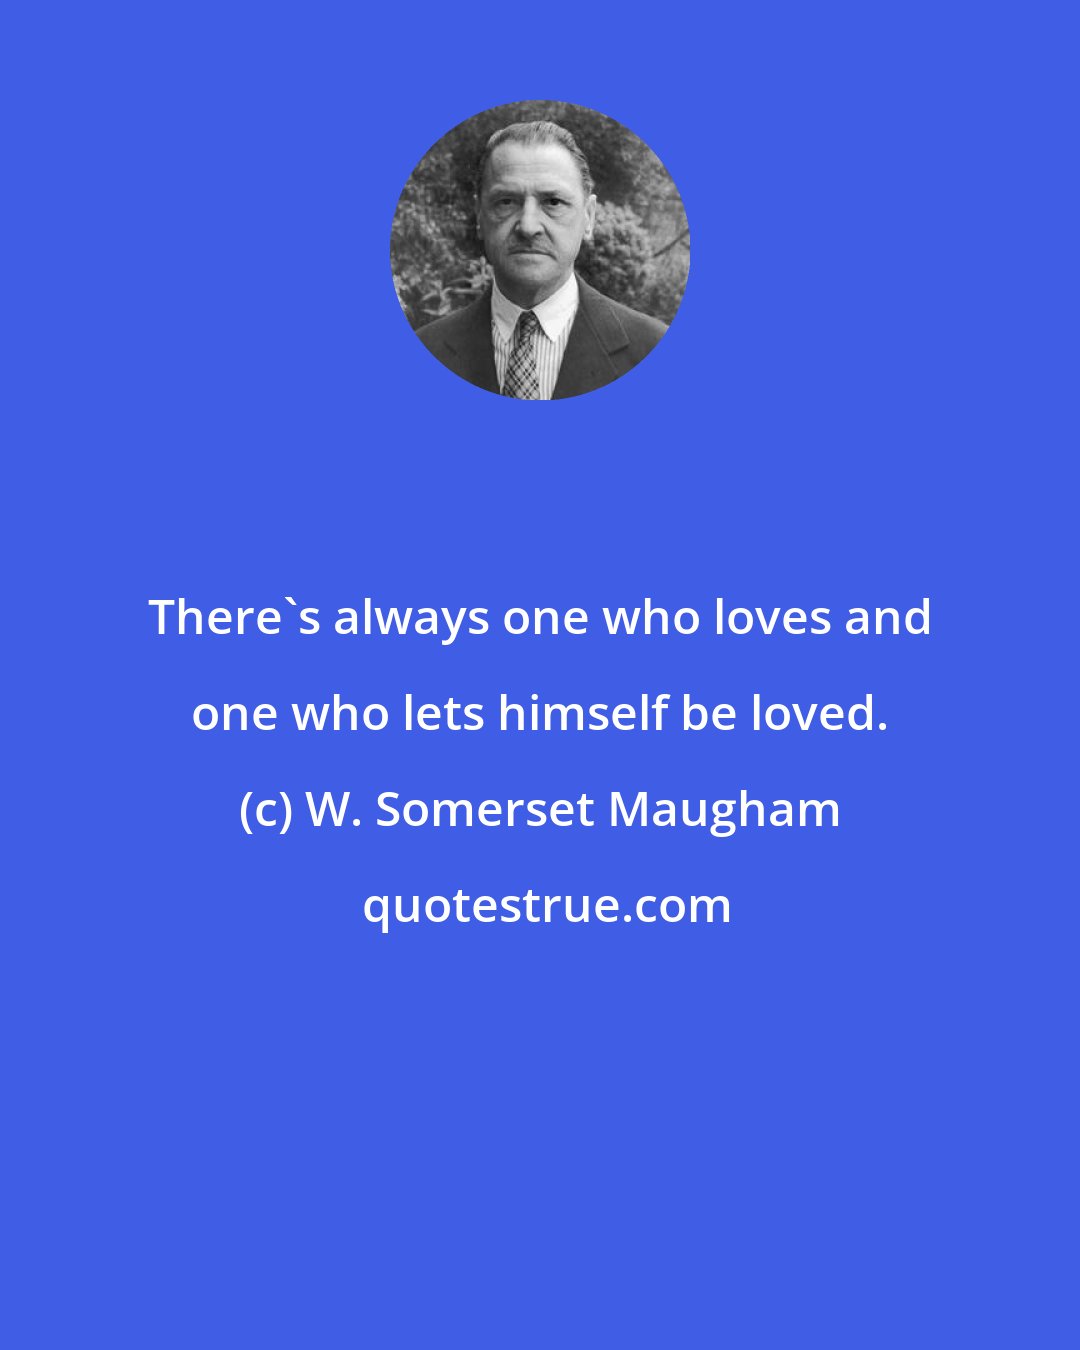 W. Somerset Maugham: There's always one who loves and one who lets himself be loved.